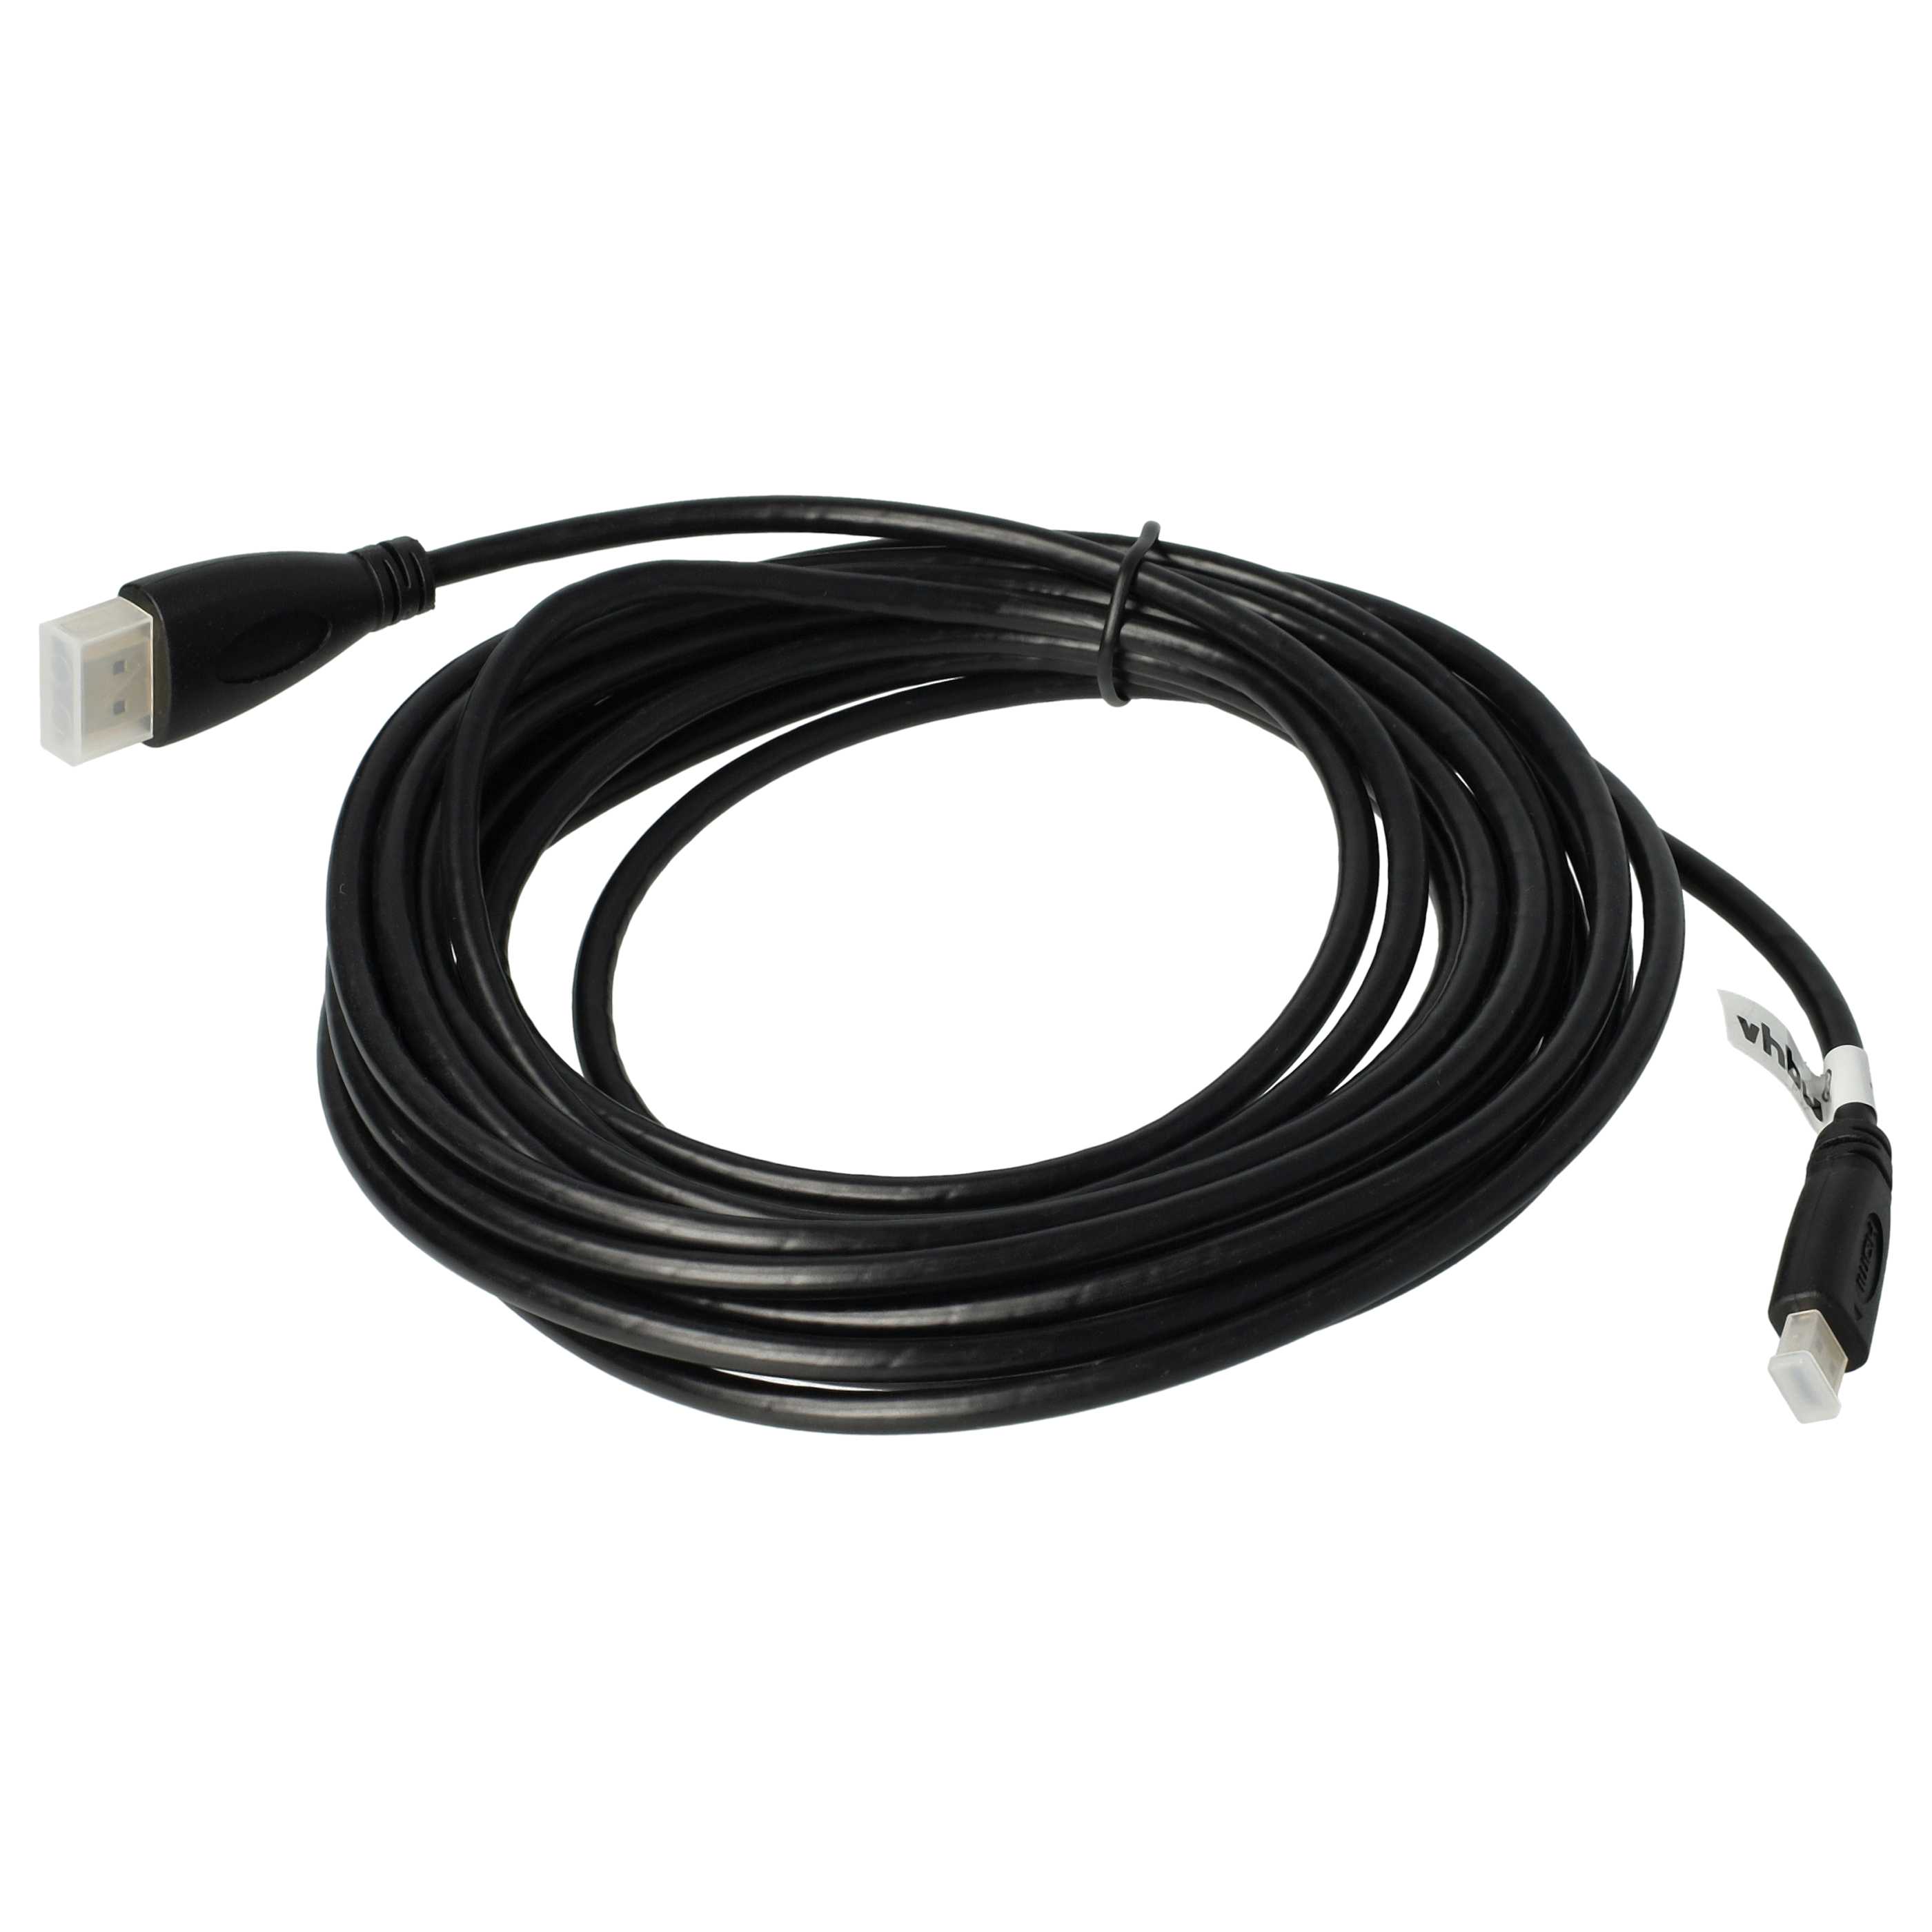 HDMI-Cable, Micro-HDMI to HDMI 1.4 5m for Tablet, Smartphone, Camera